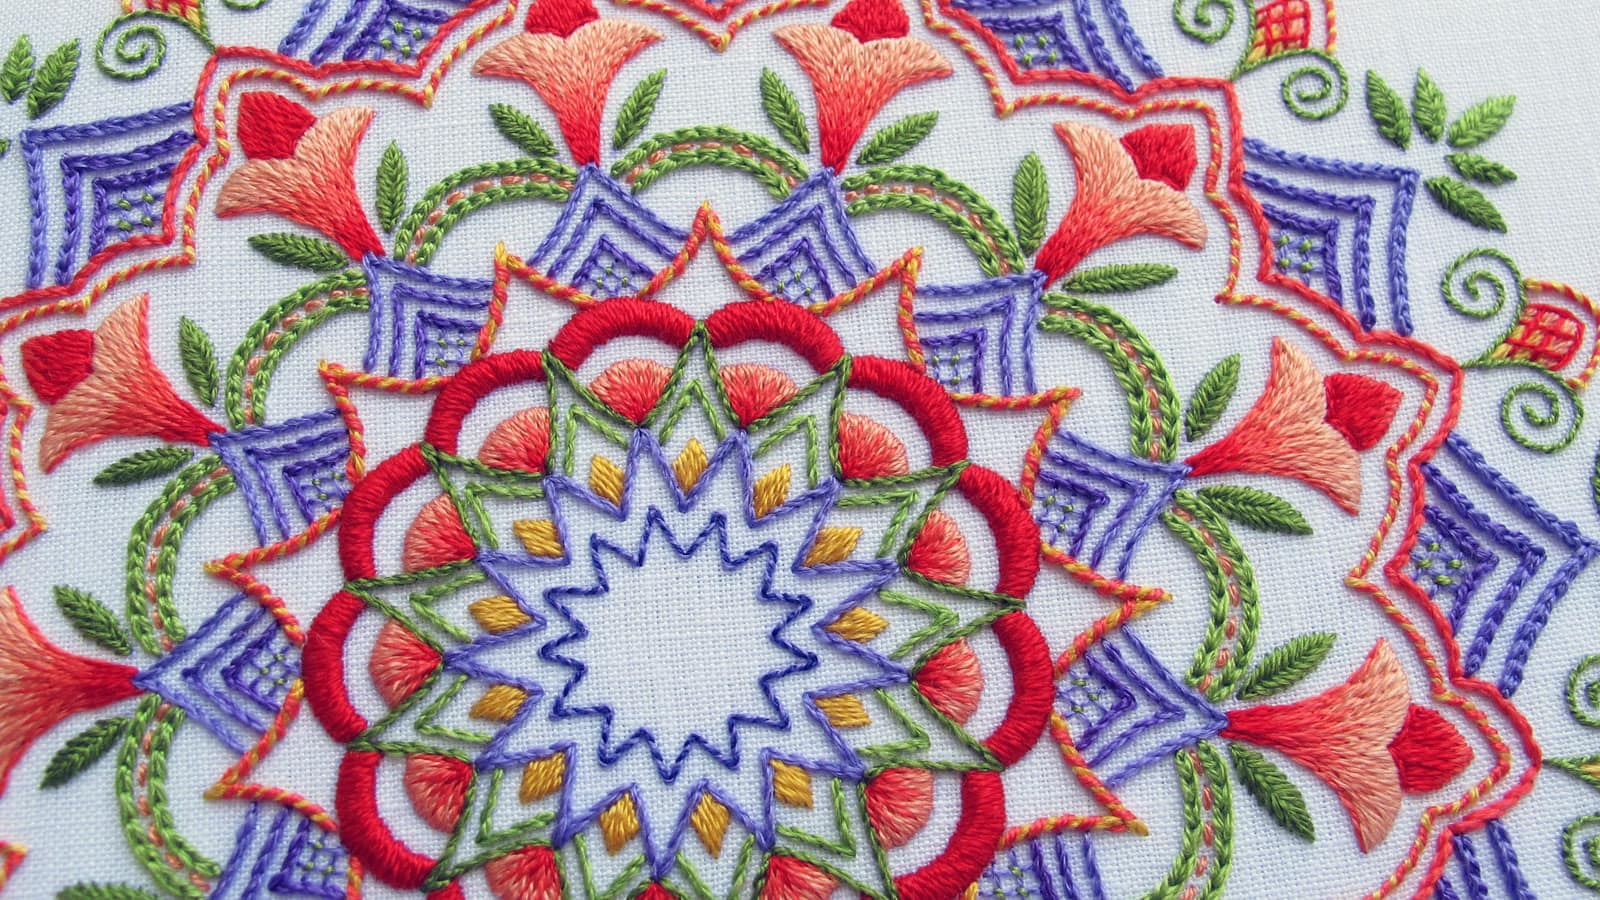 Ethnic Embroidery Patterns Needlenthread Tips Tricks And Great Resources For Hand Embroidery